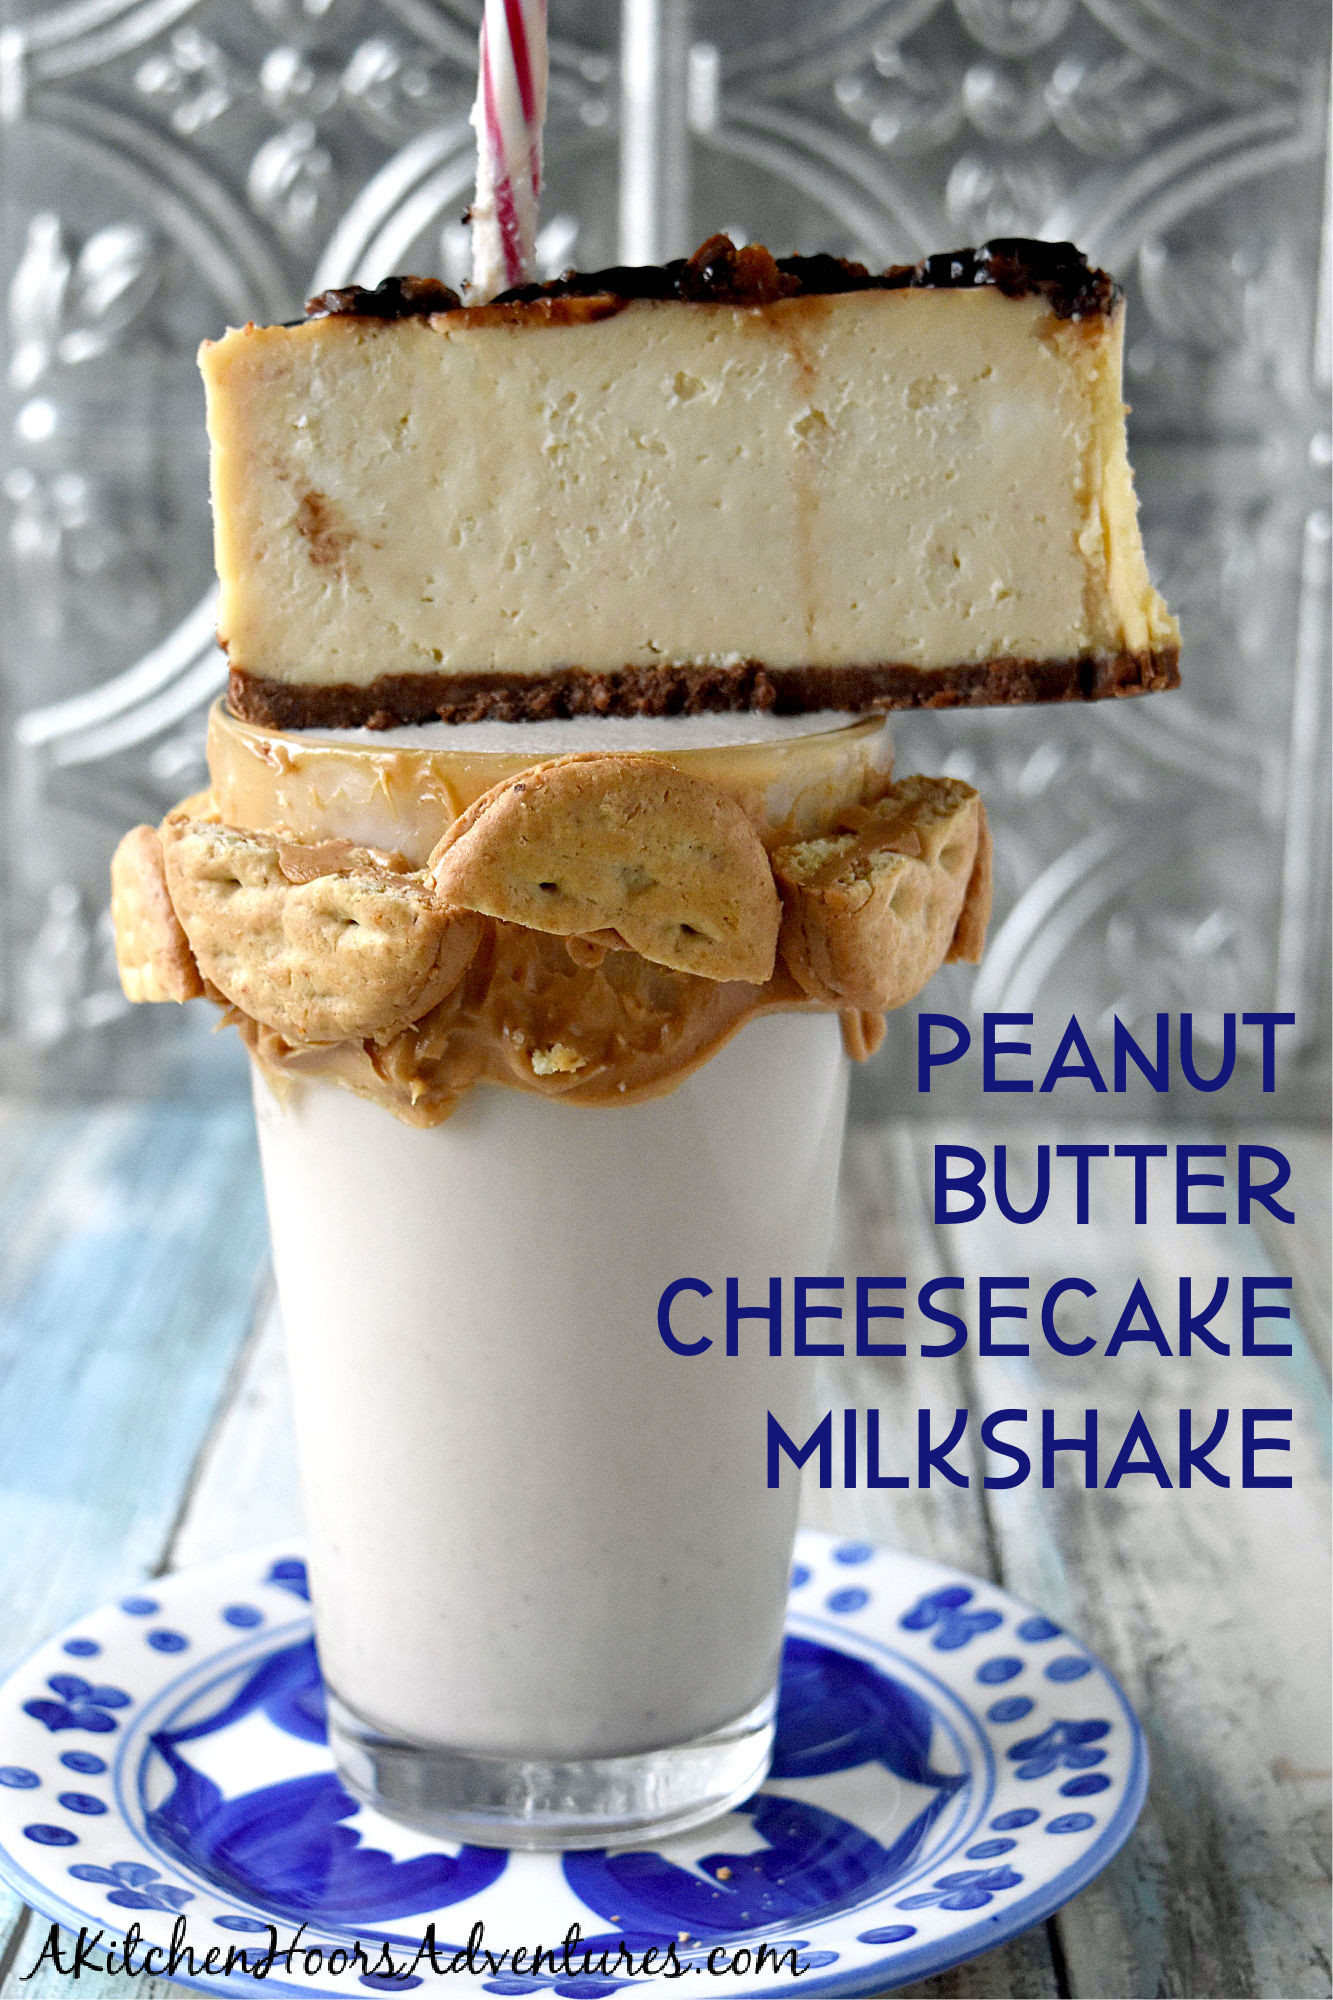 Peanut Butter Cheesecake Milkshakes tastes like a peanut butter cheesecake in a glass. It is sweet, full of peanut butter flavor with a hint of cheesecake tang.  #OurFamilyTable